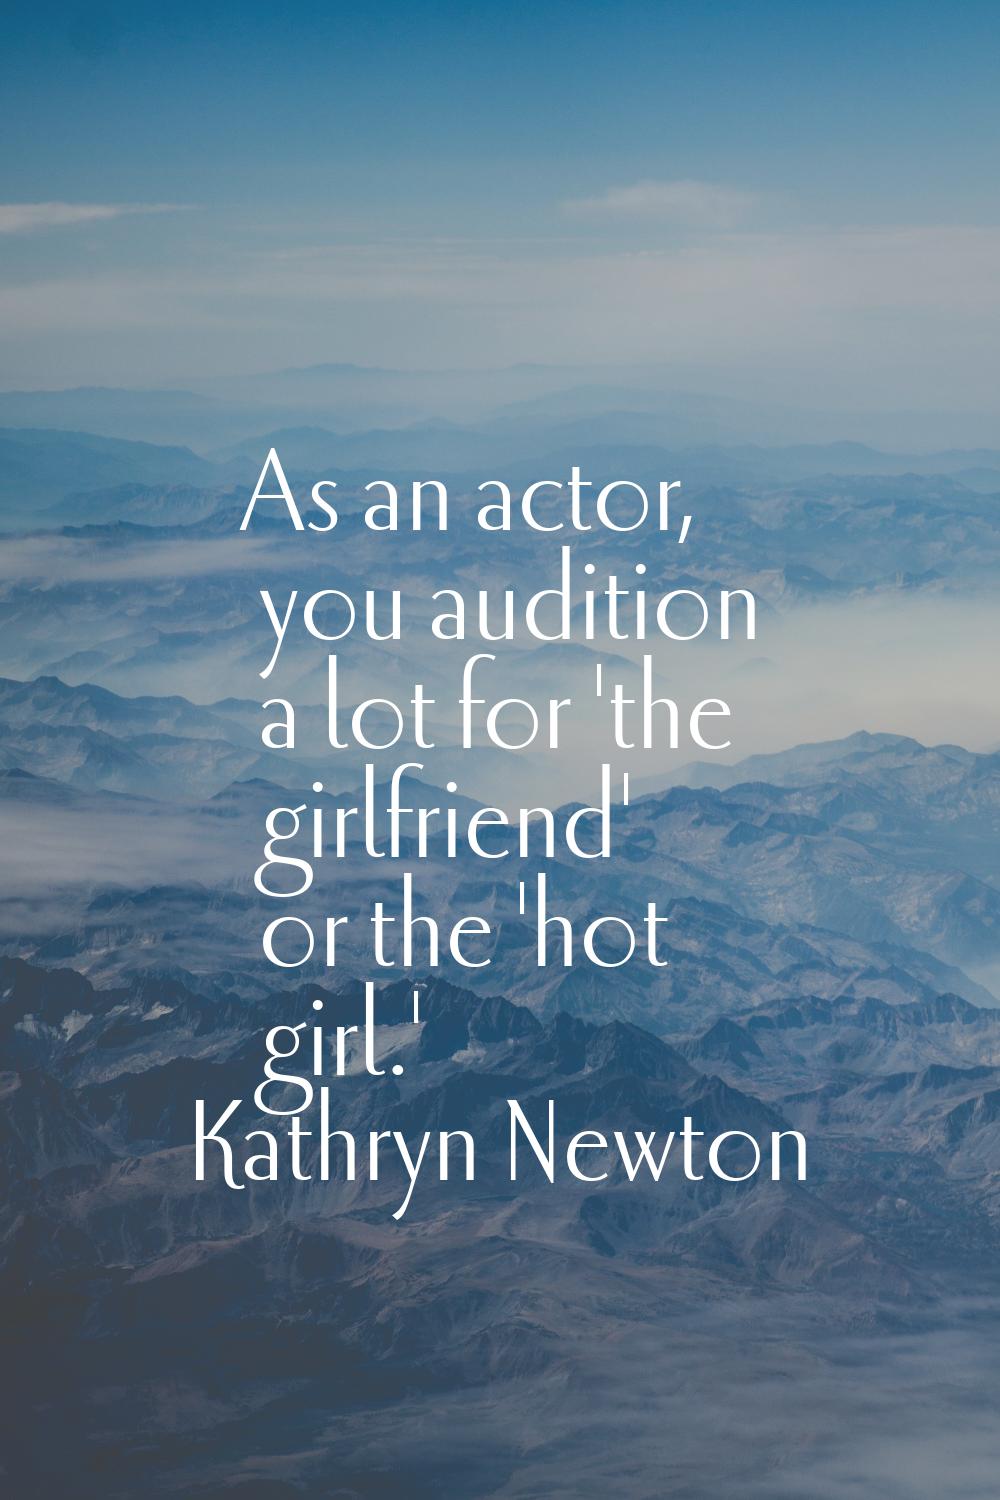 As an actor, you audition a lot for 'the girlfriend' or the 'hot girl.'